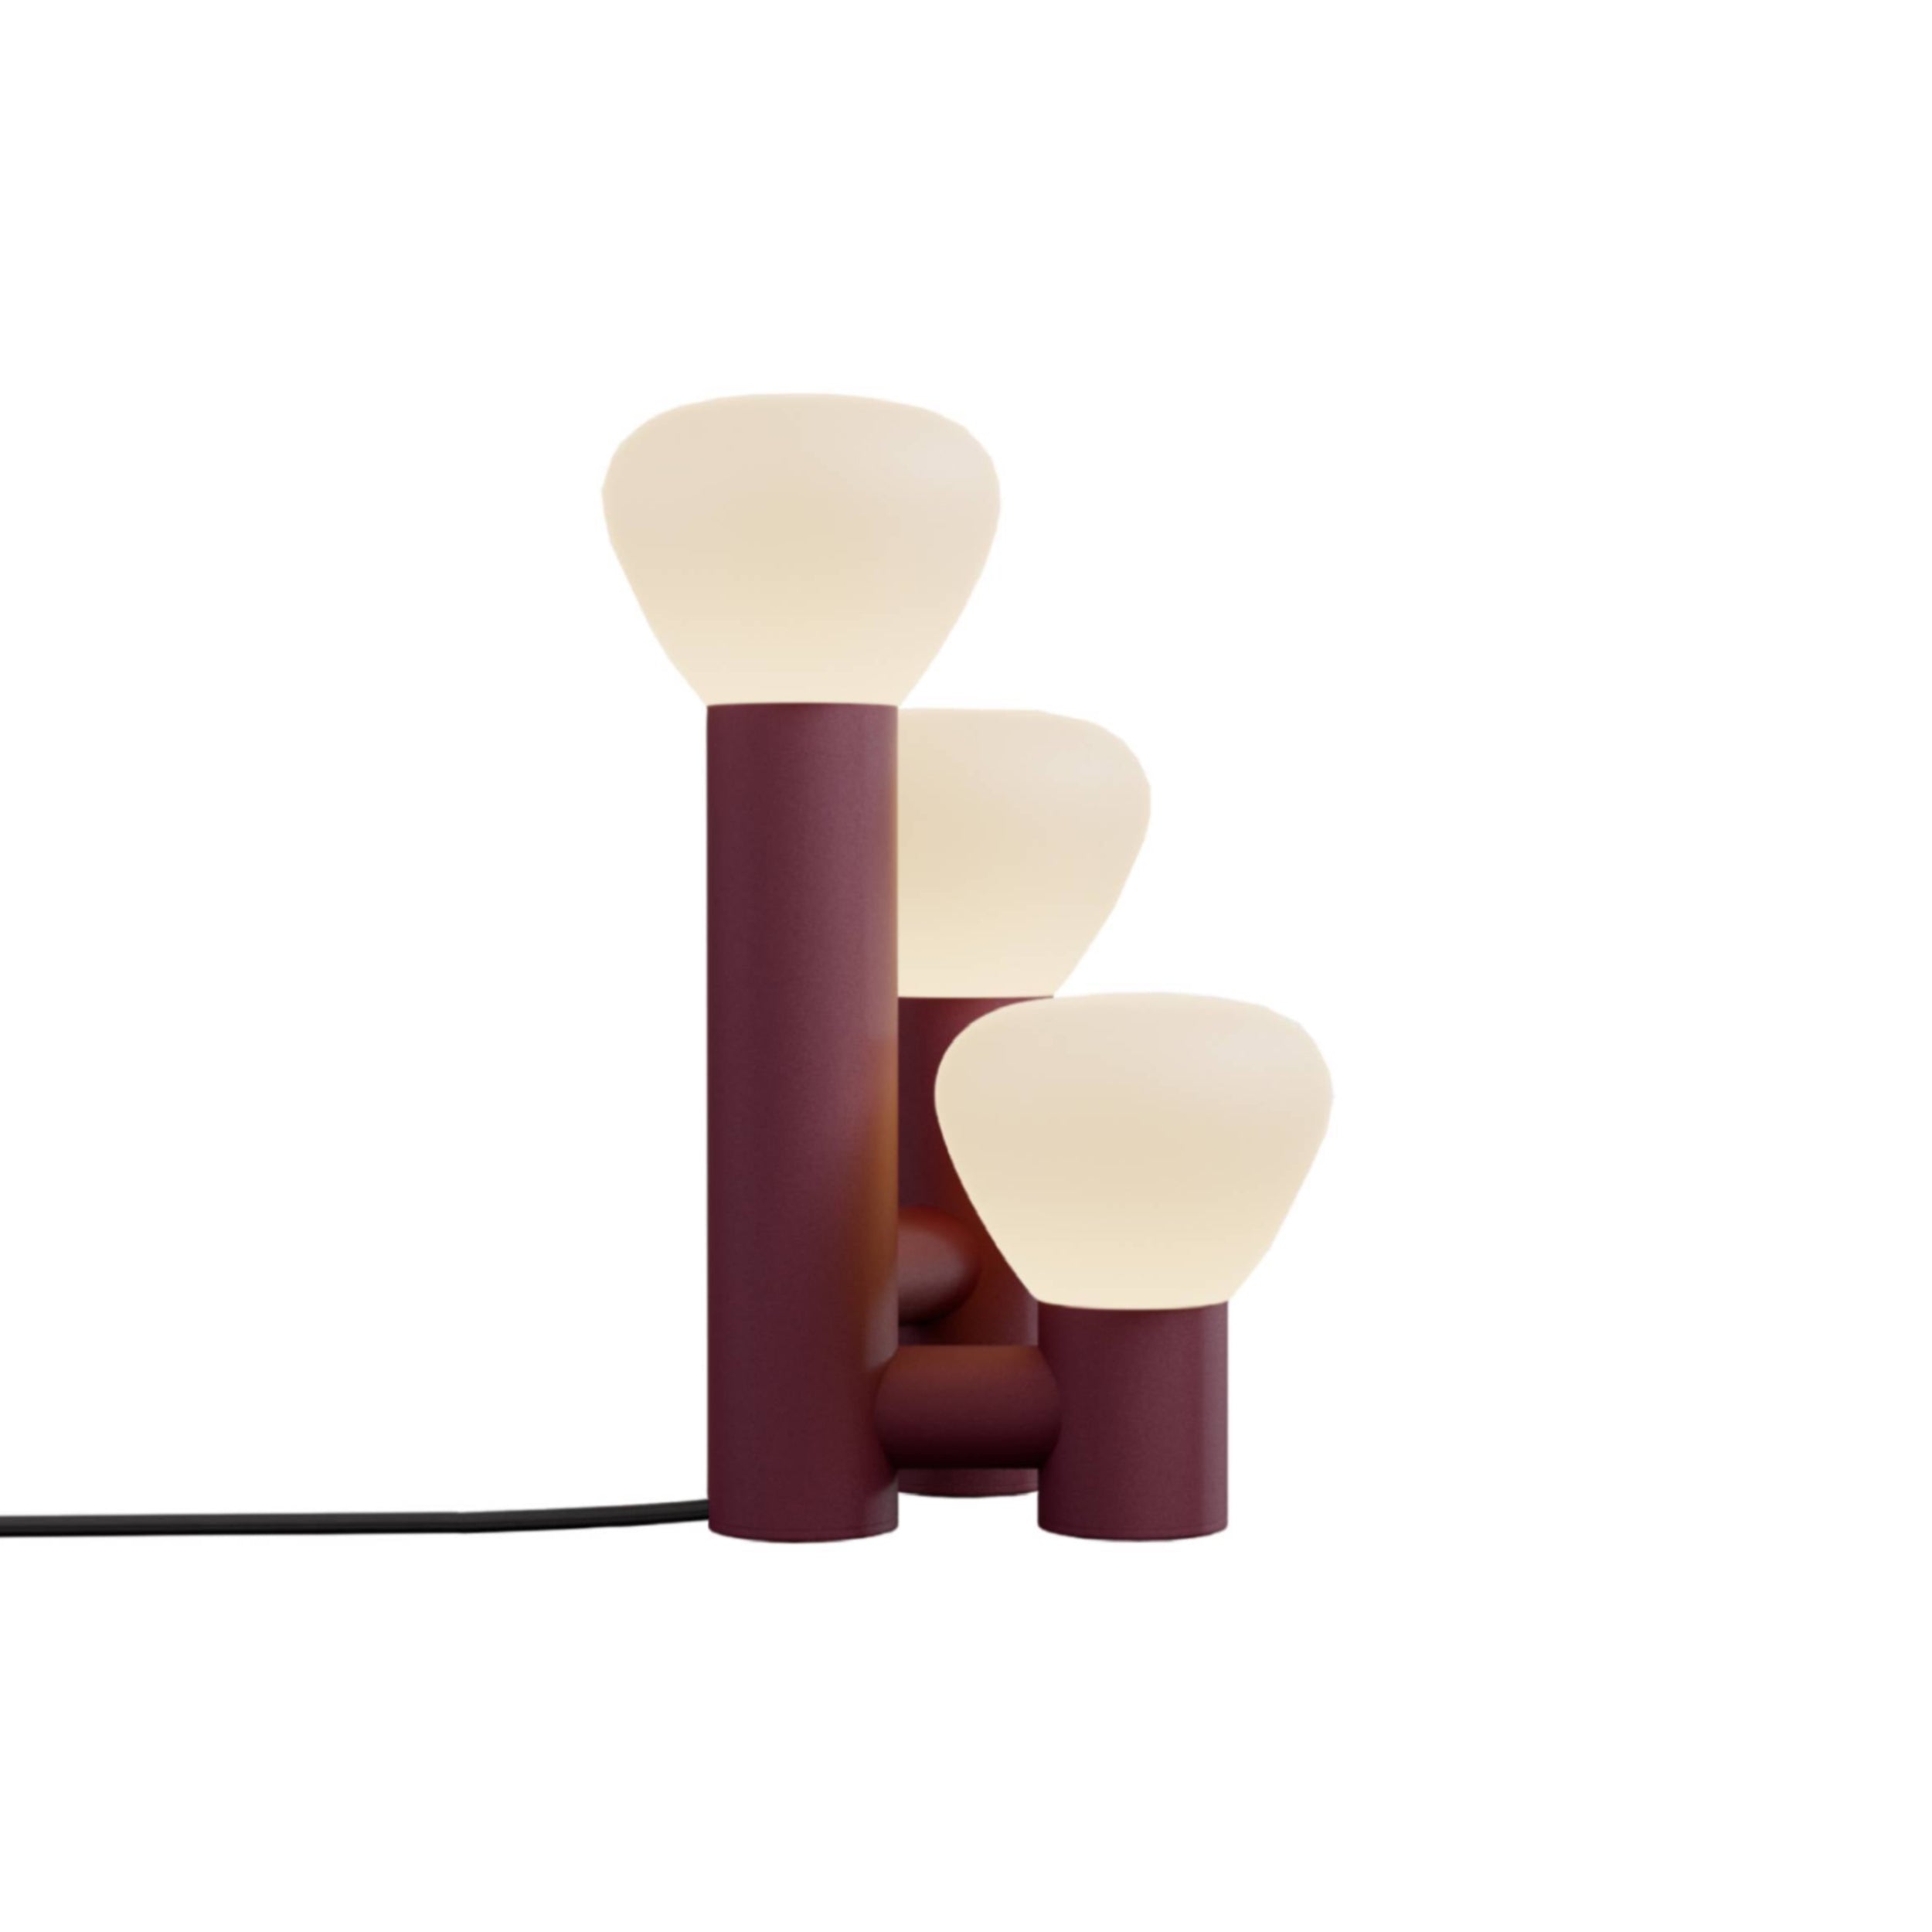 Parc 06 Table Lamp: Footswitch +  Burgundy + Black